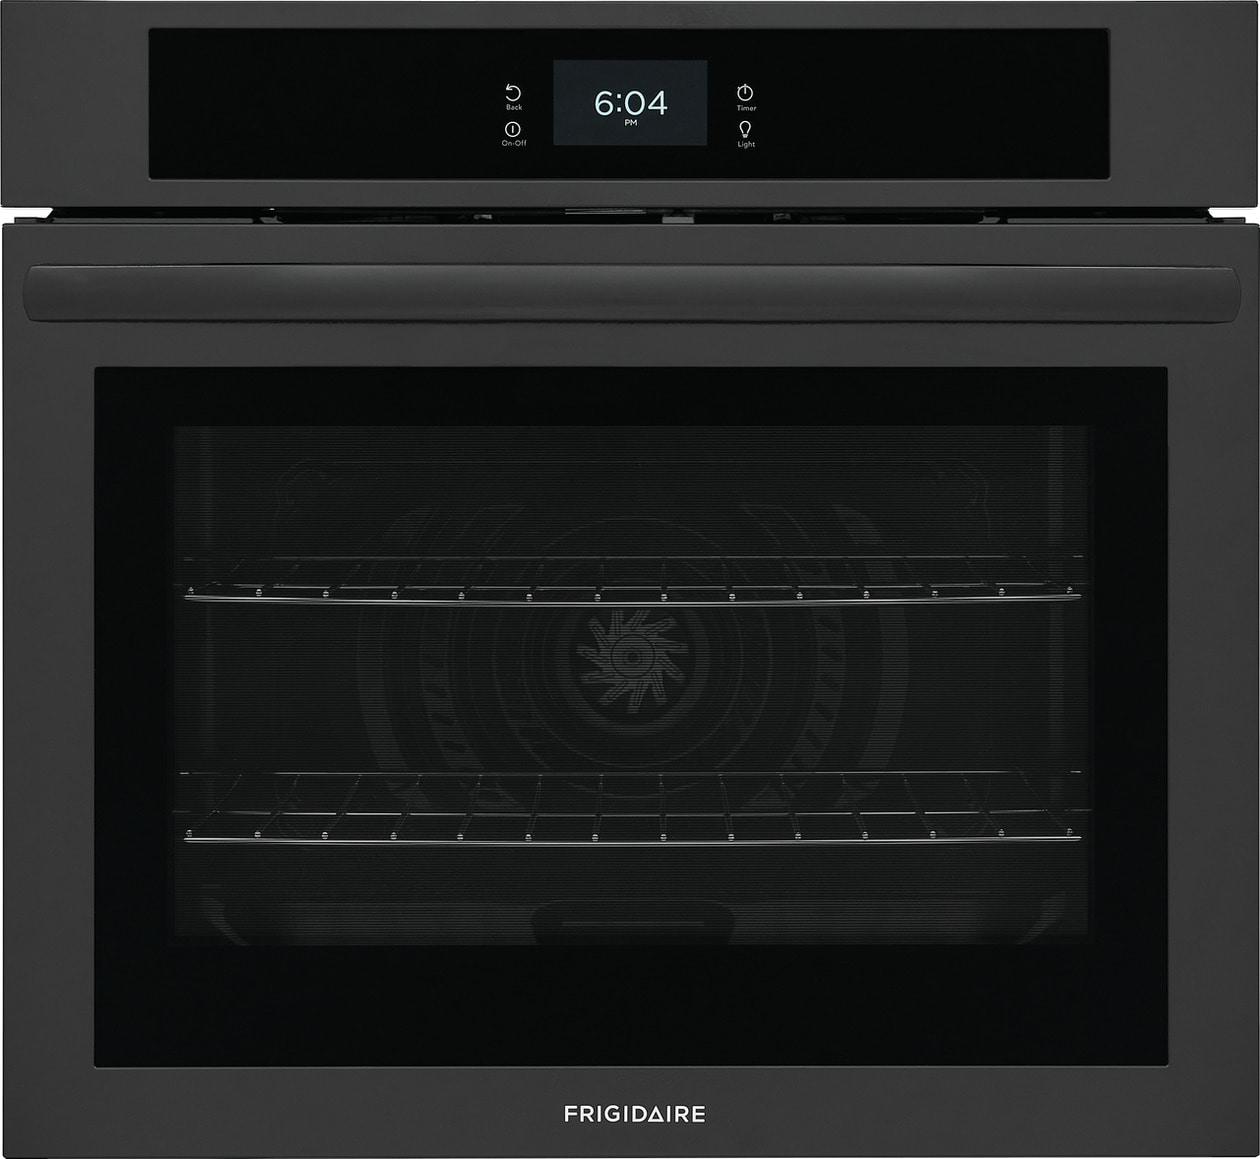 Frigidaire 30" Single Electric Wall Oven with Fan Convection